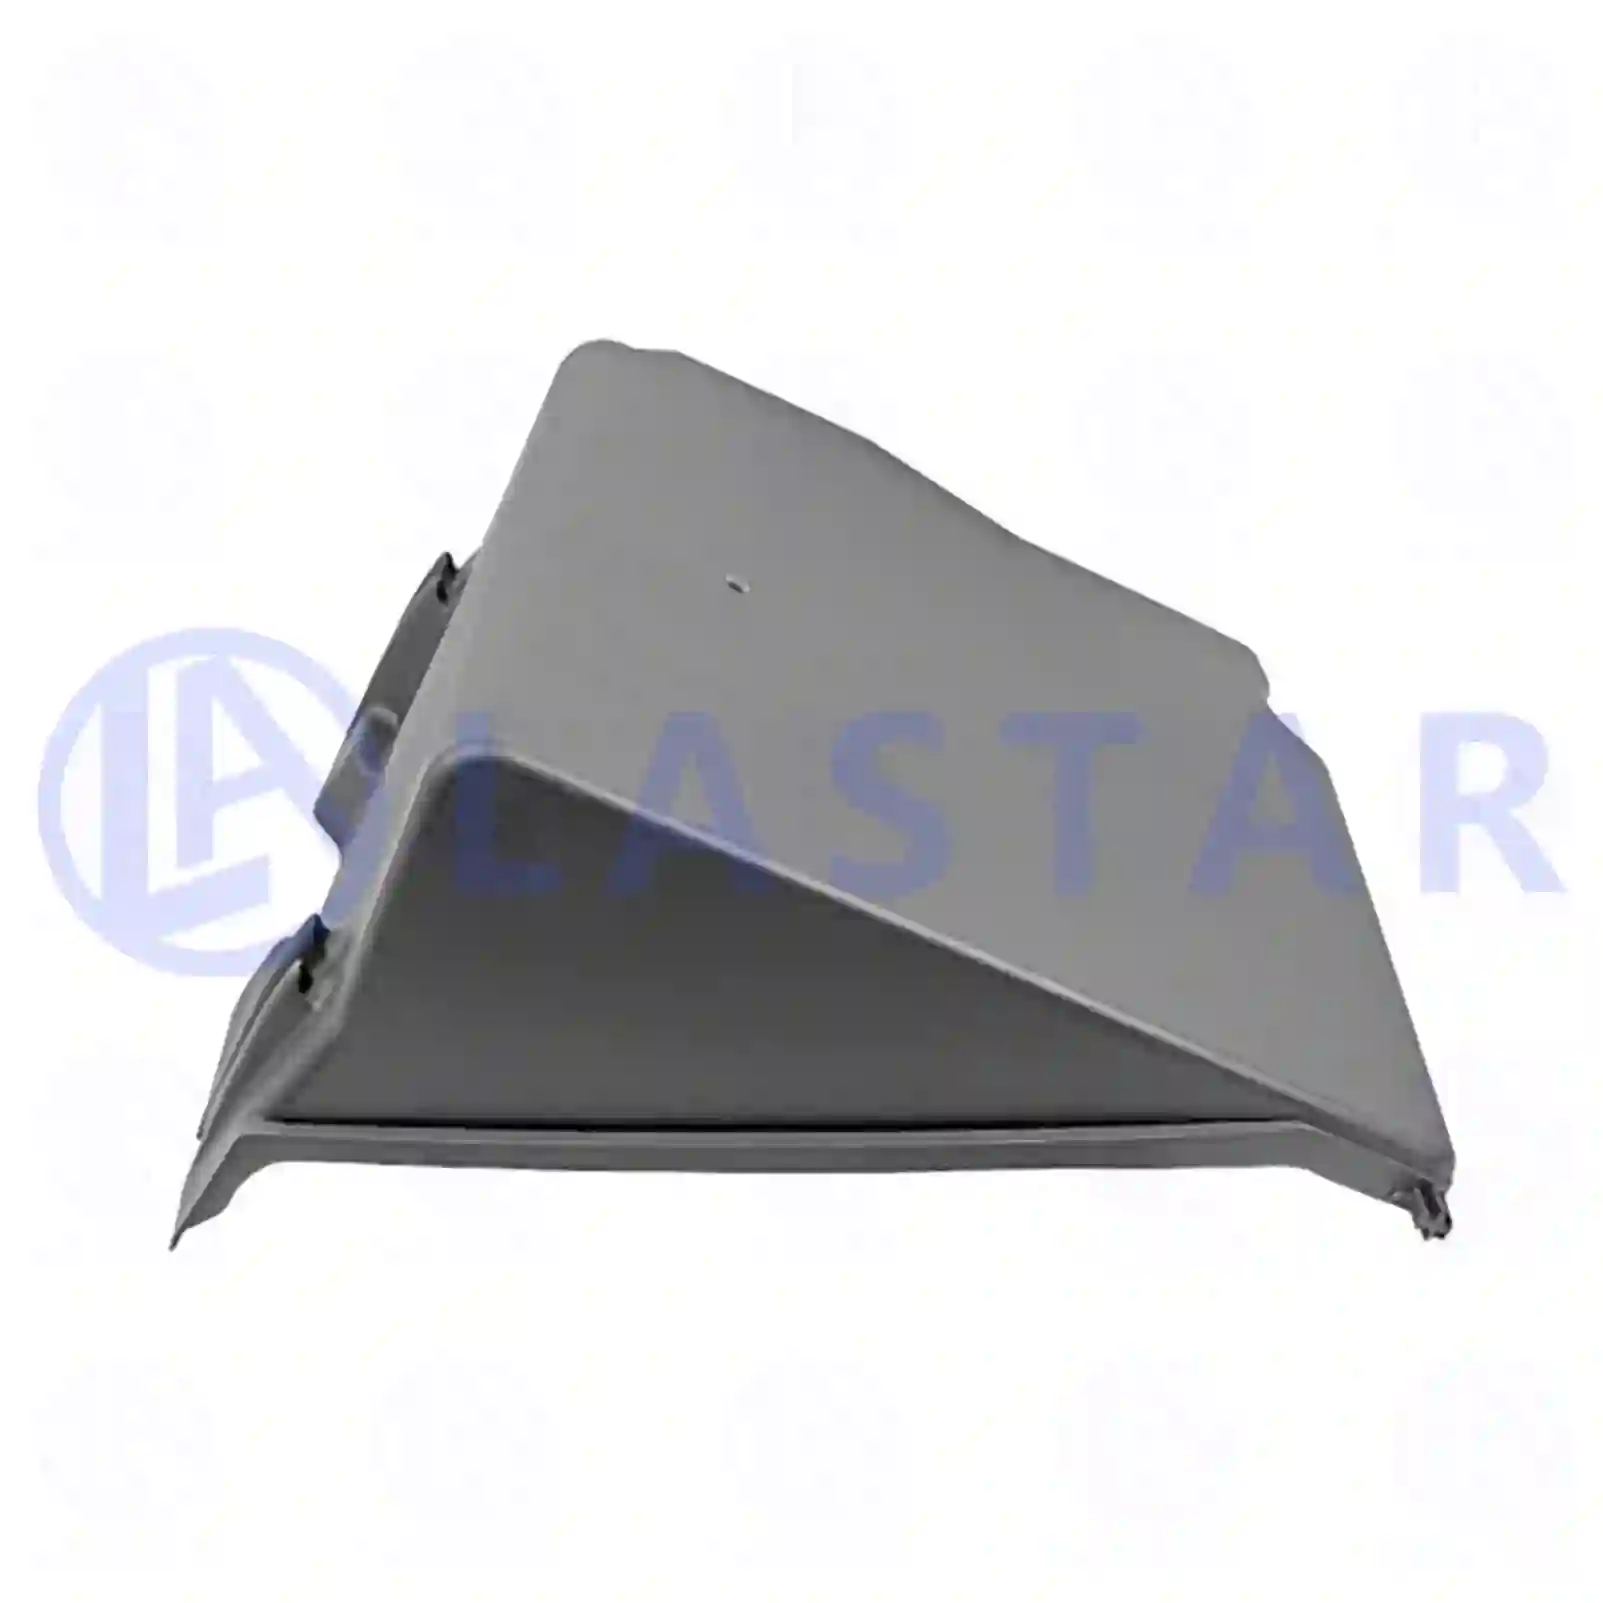 Battery cover, 77713336, 1362693, ZG60024-0008 ||  77713336 Lastar Spare Part | Truck Spare Parts, Auotomotive Spare Parts Battery cover, 77713336, 1362693, ZG60024-0008 ||  77713336 Lastar Spare Part | Truck Spare Parts, Auotomotive Spare Parts